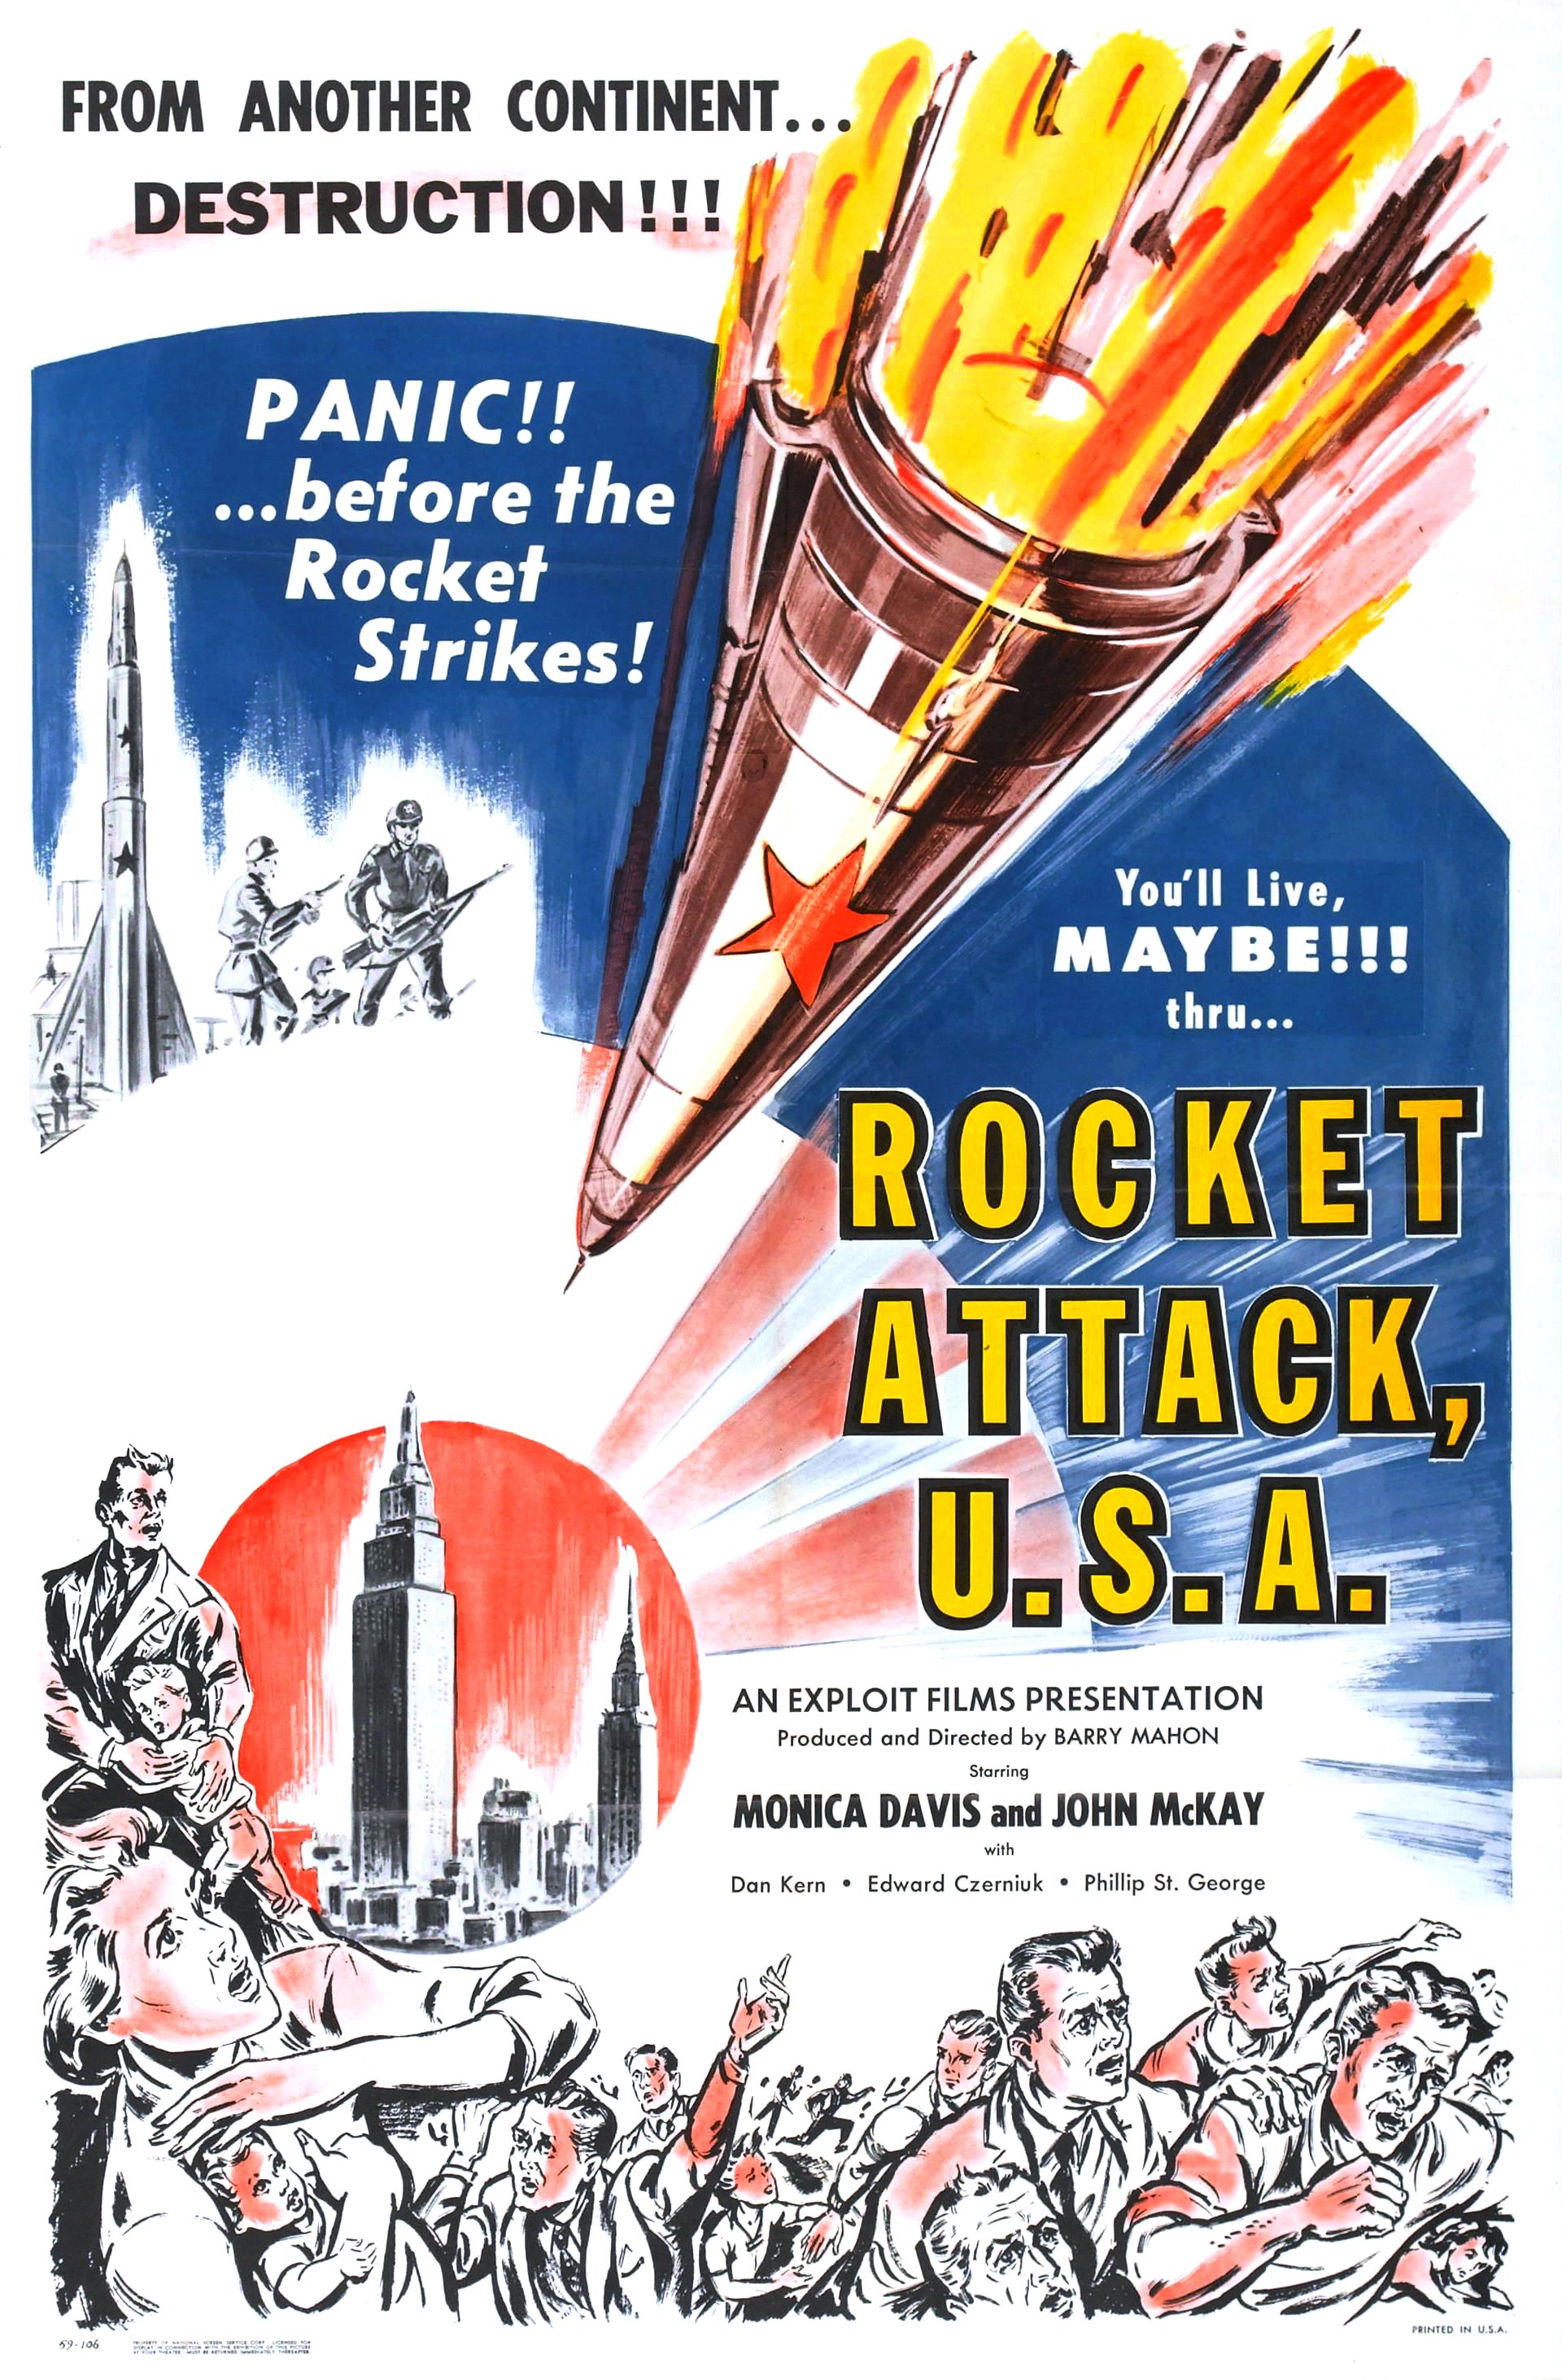 rocket attack usa poster - From Another Continent... Destruction!!! Panic!! ...before the Rocket Strikes! You'll Live, Maybe!!! thro... Rocket Attack, U.S.A. An Exploit Films Presentation Monica Davis and John Mckay .